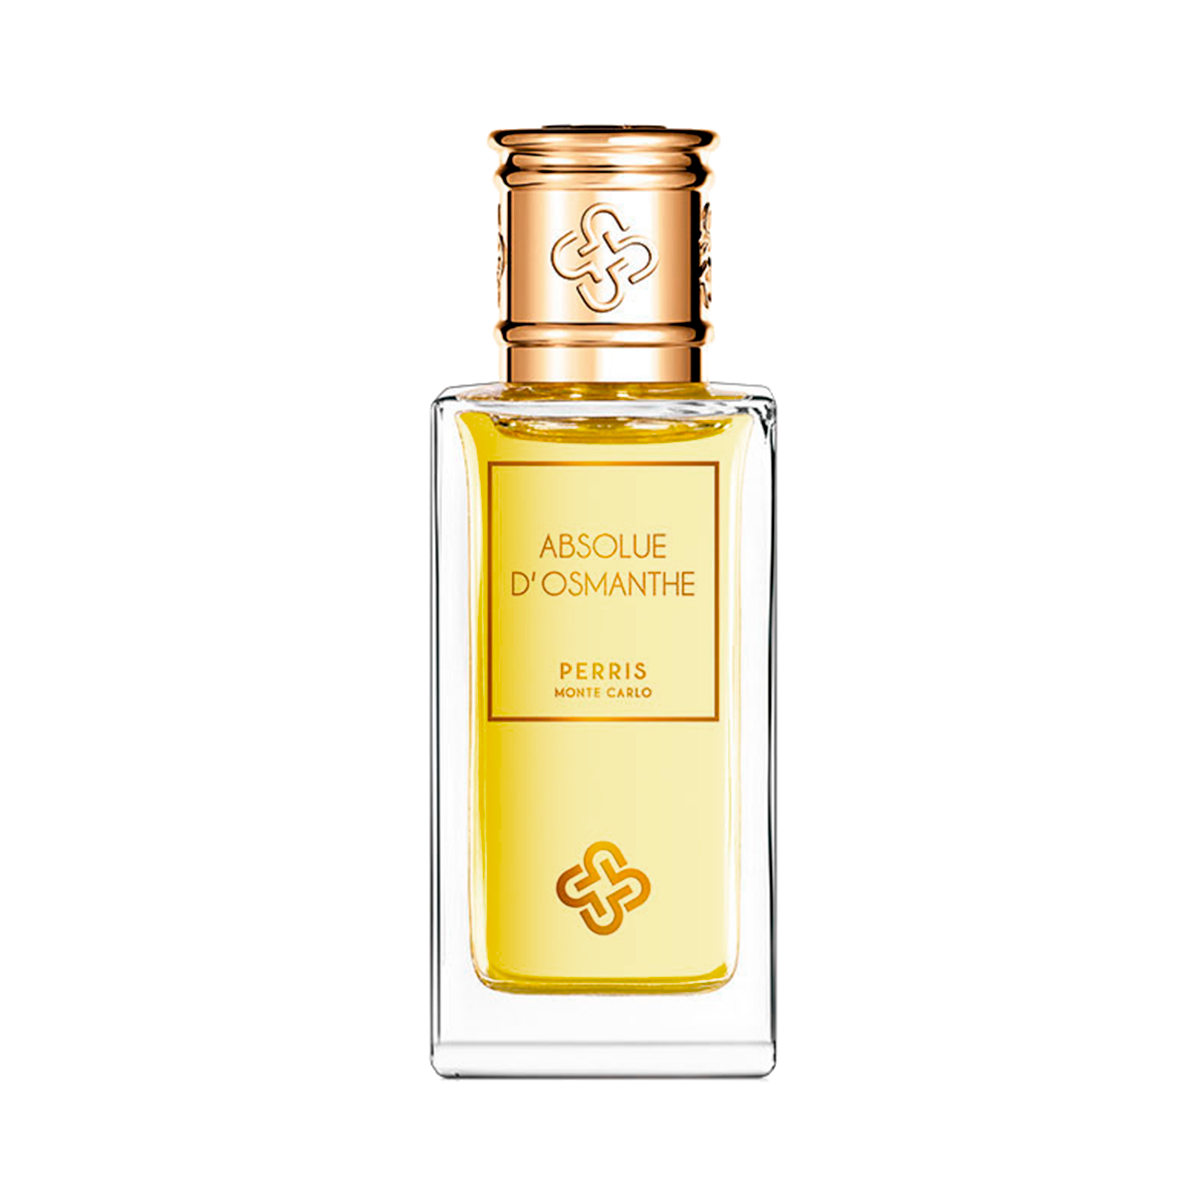 Absolue D'Osmanthe - Perris Monte Carlo - EP 50ml